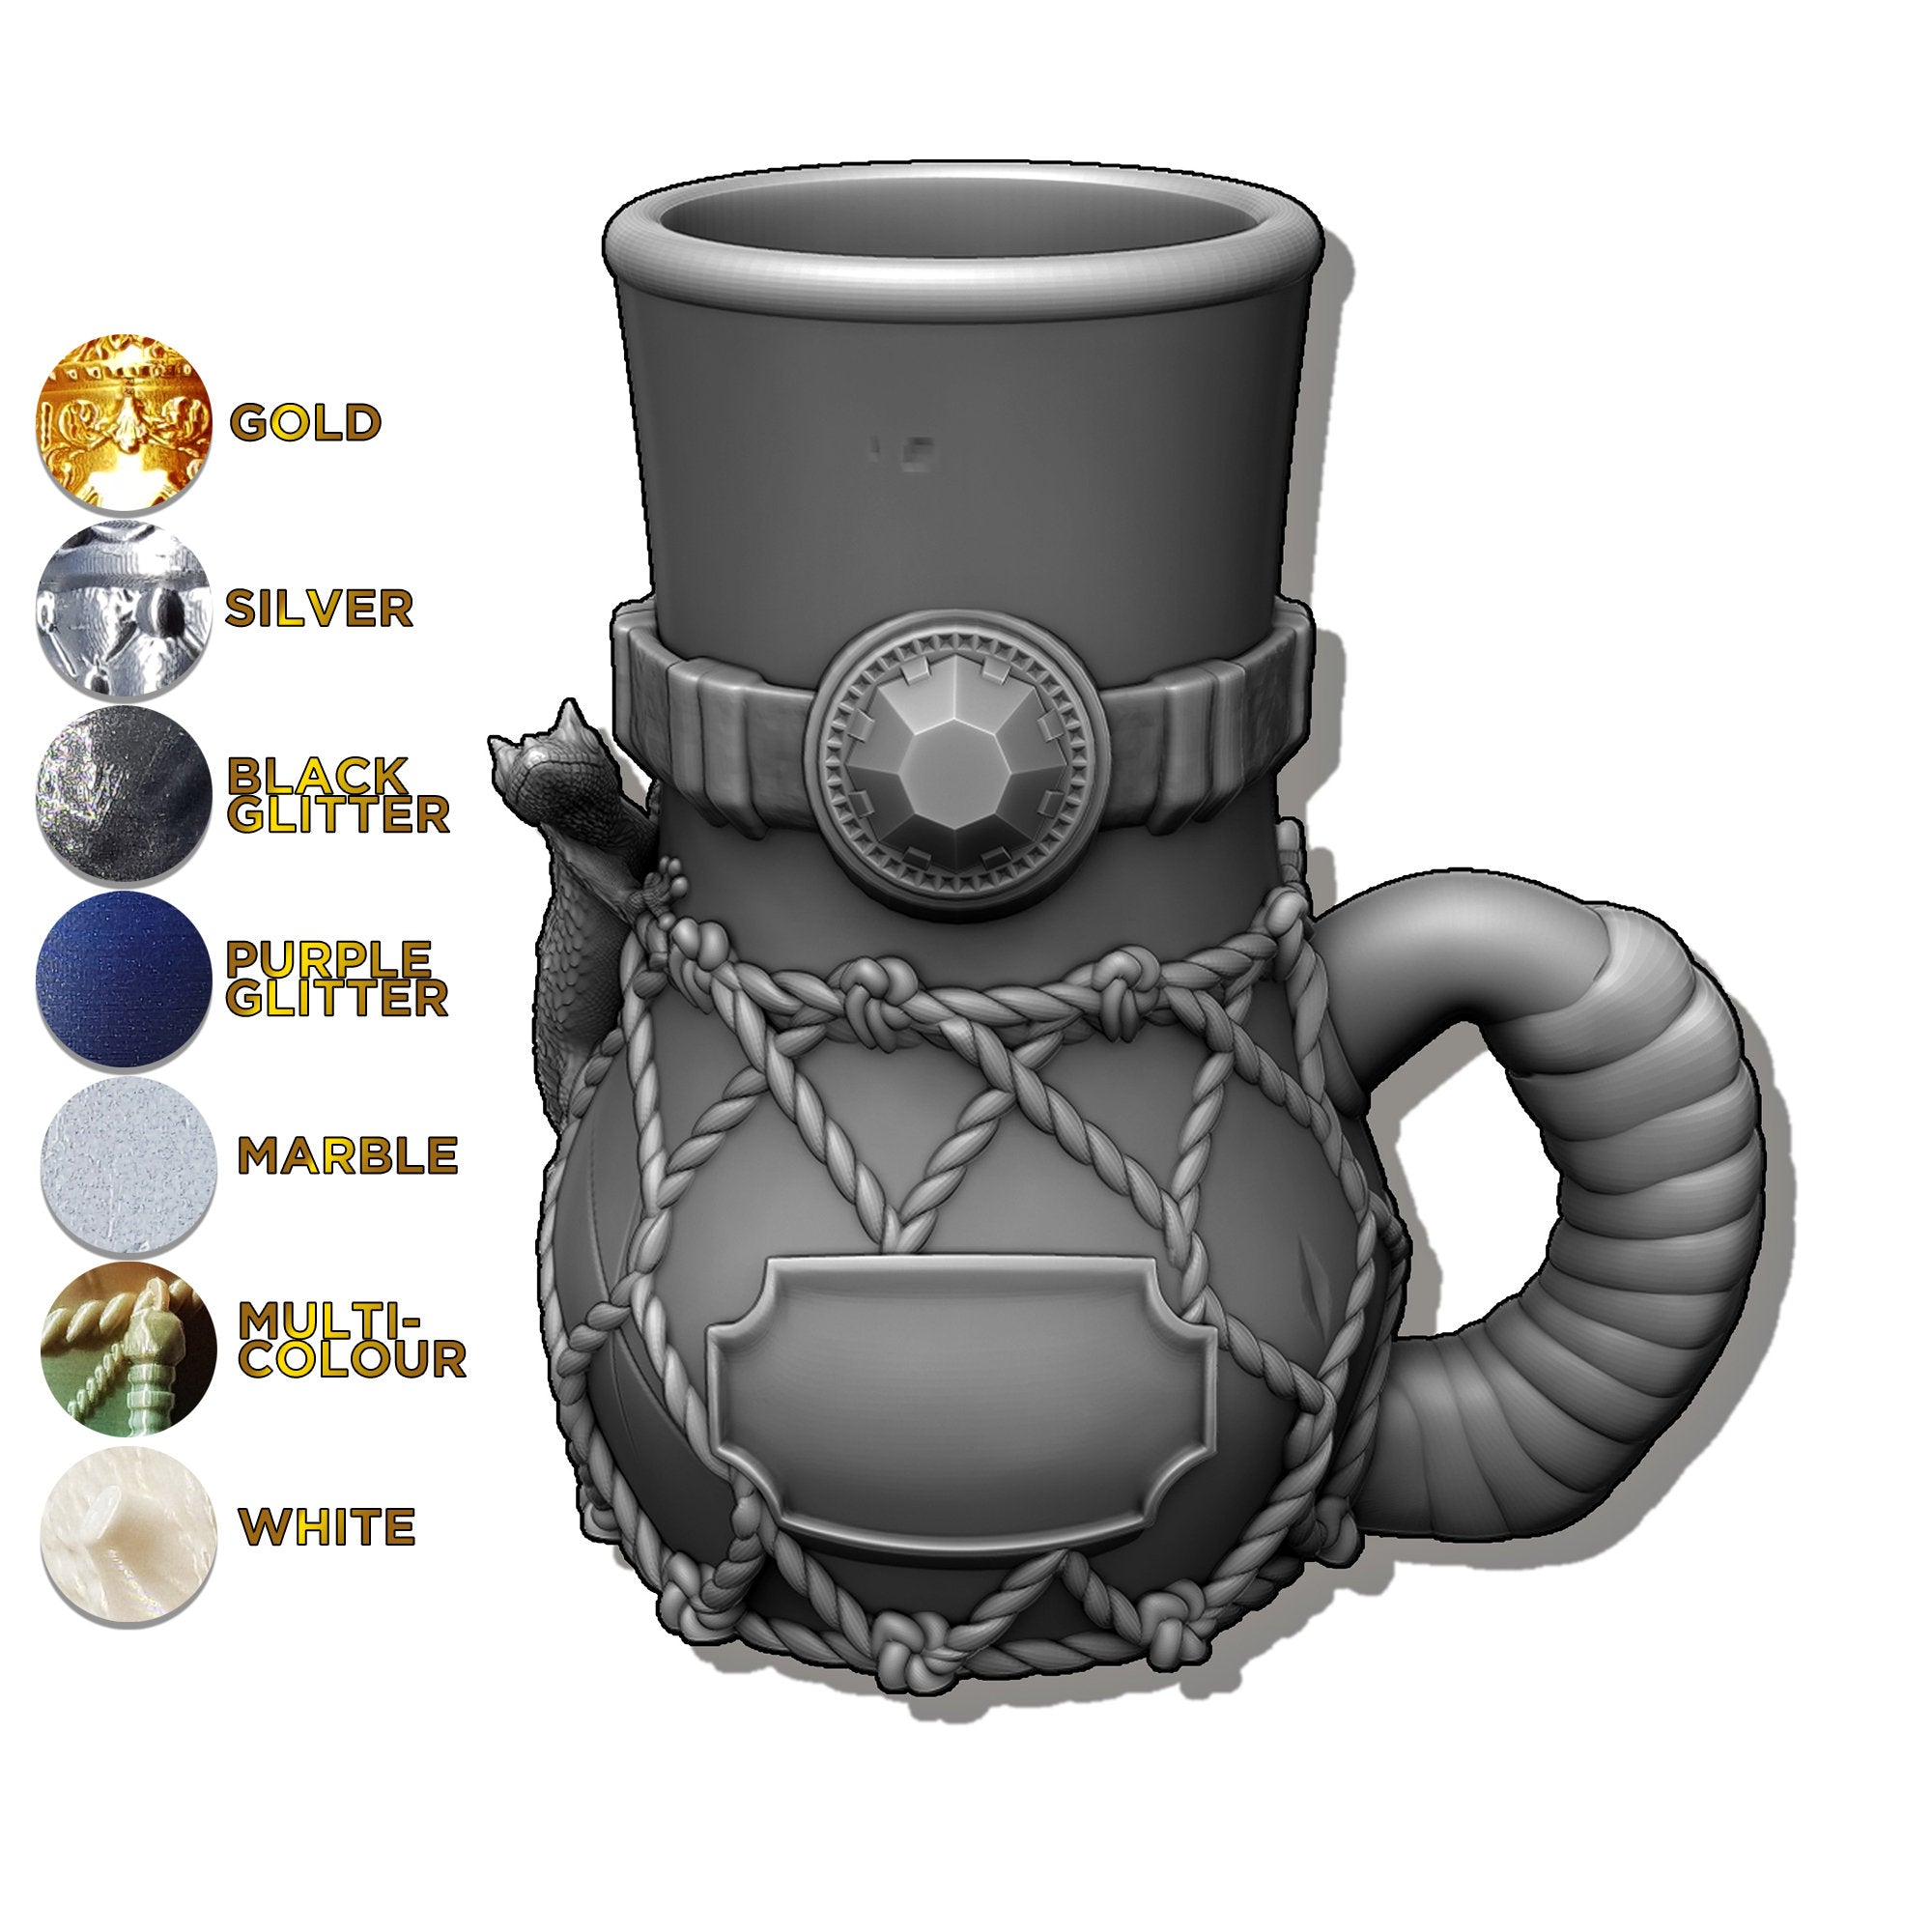 The WIZARD | Mythic Mug | Larp | Gaming Zubehör | Tabletop | Dice Cup | Box | Holder-Role Playing Games